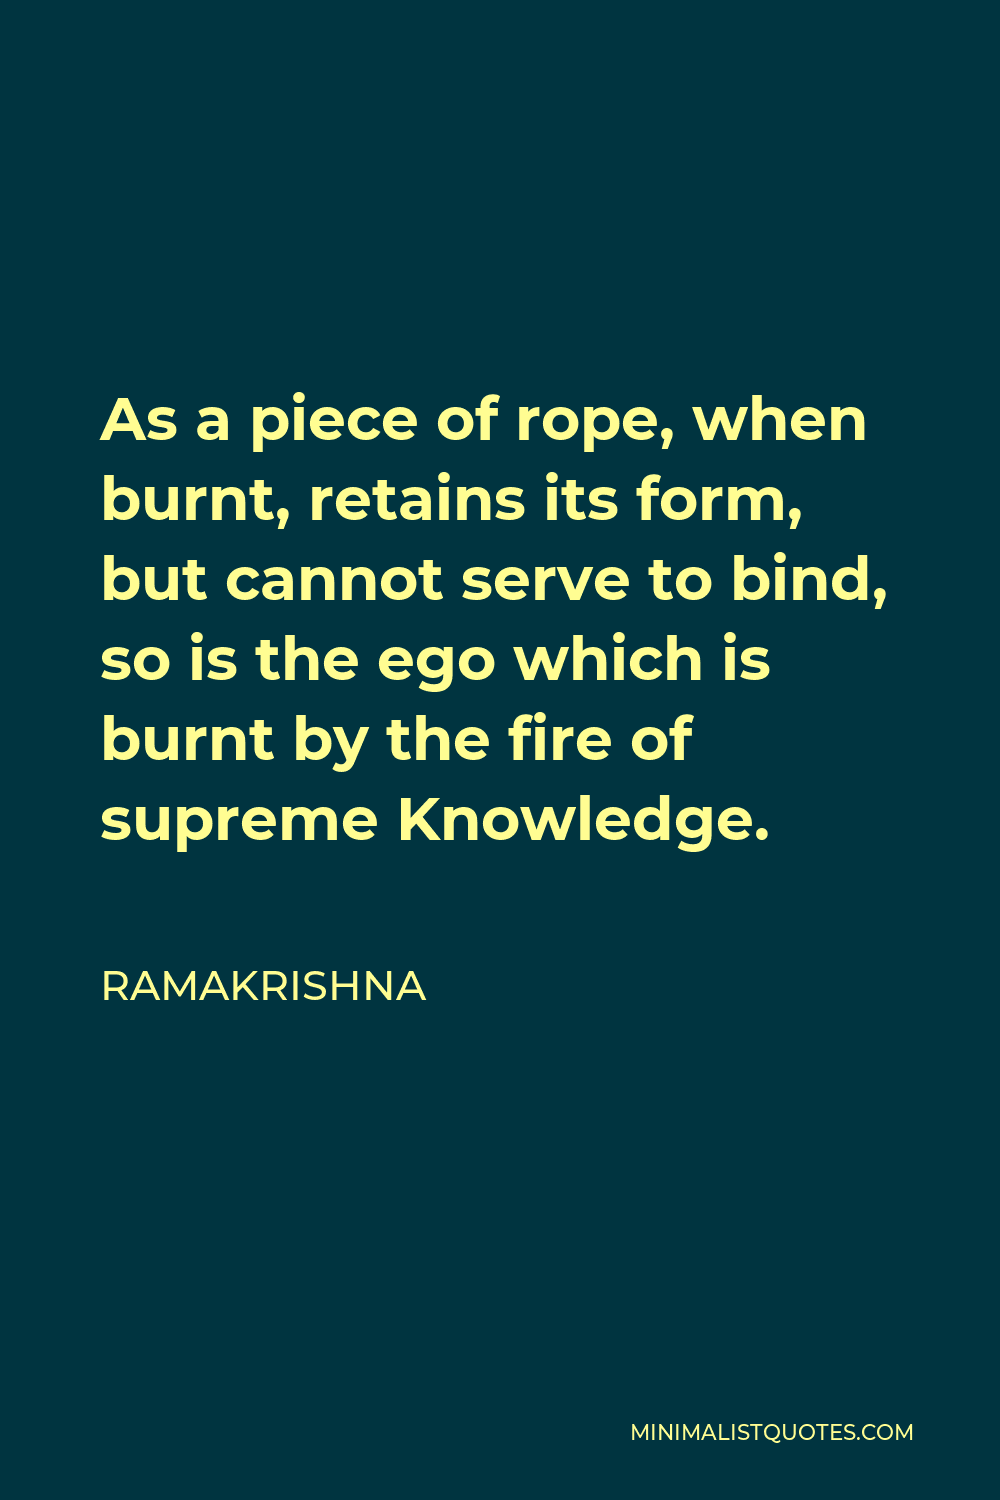 Ramakrishna Quote - As a piece of rope, when burnt, retains its form, but cannot serve to bind, so is the ego which is burnt by the fire of supreme Knowledge.